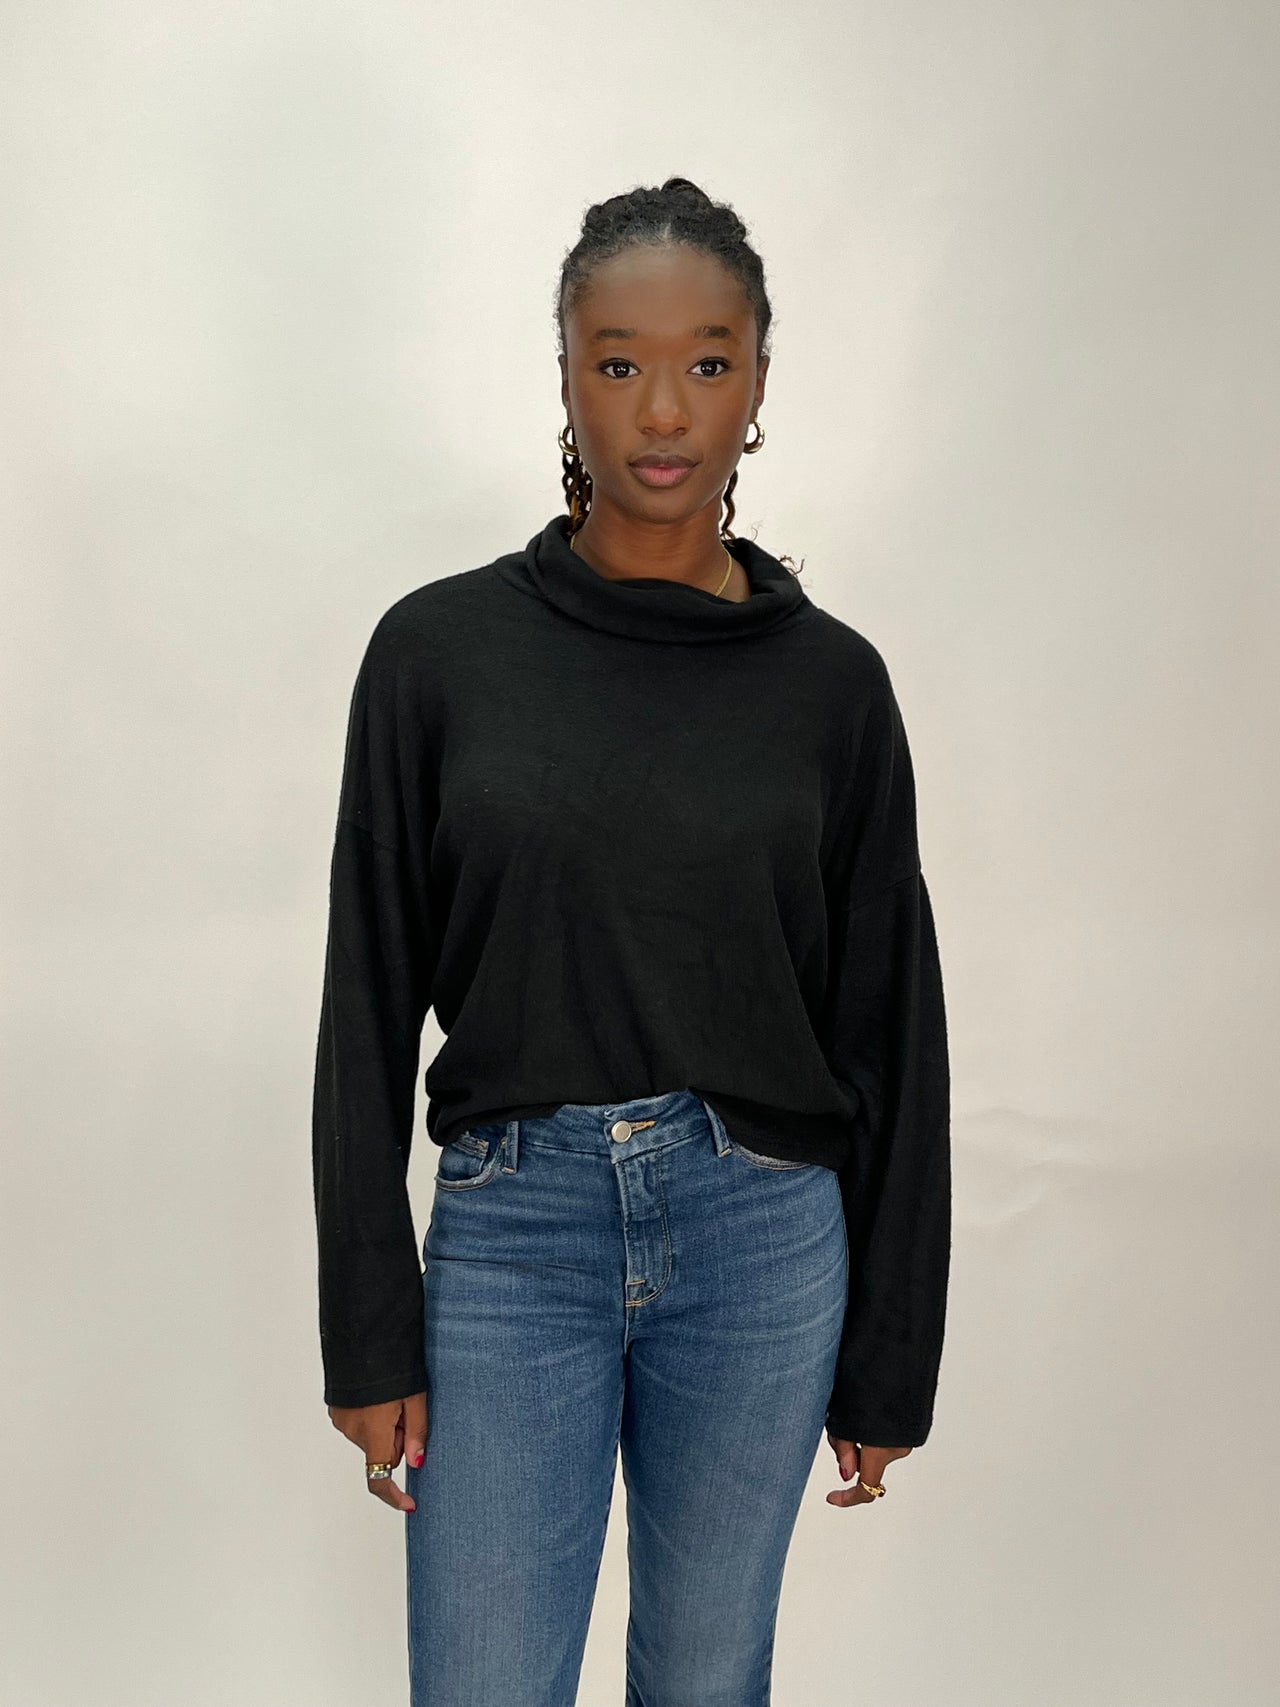 Dont Get It Twisted Sweater Black, Sweater by Wasabi + Mint | LIT Boutique